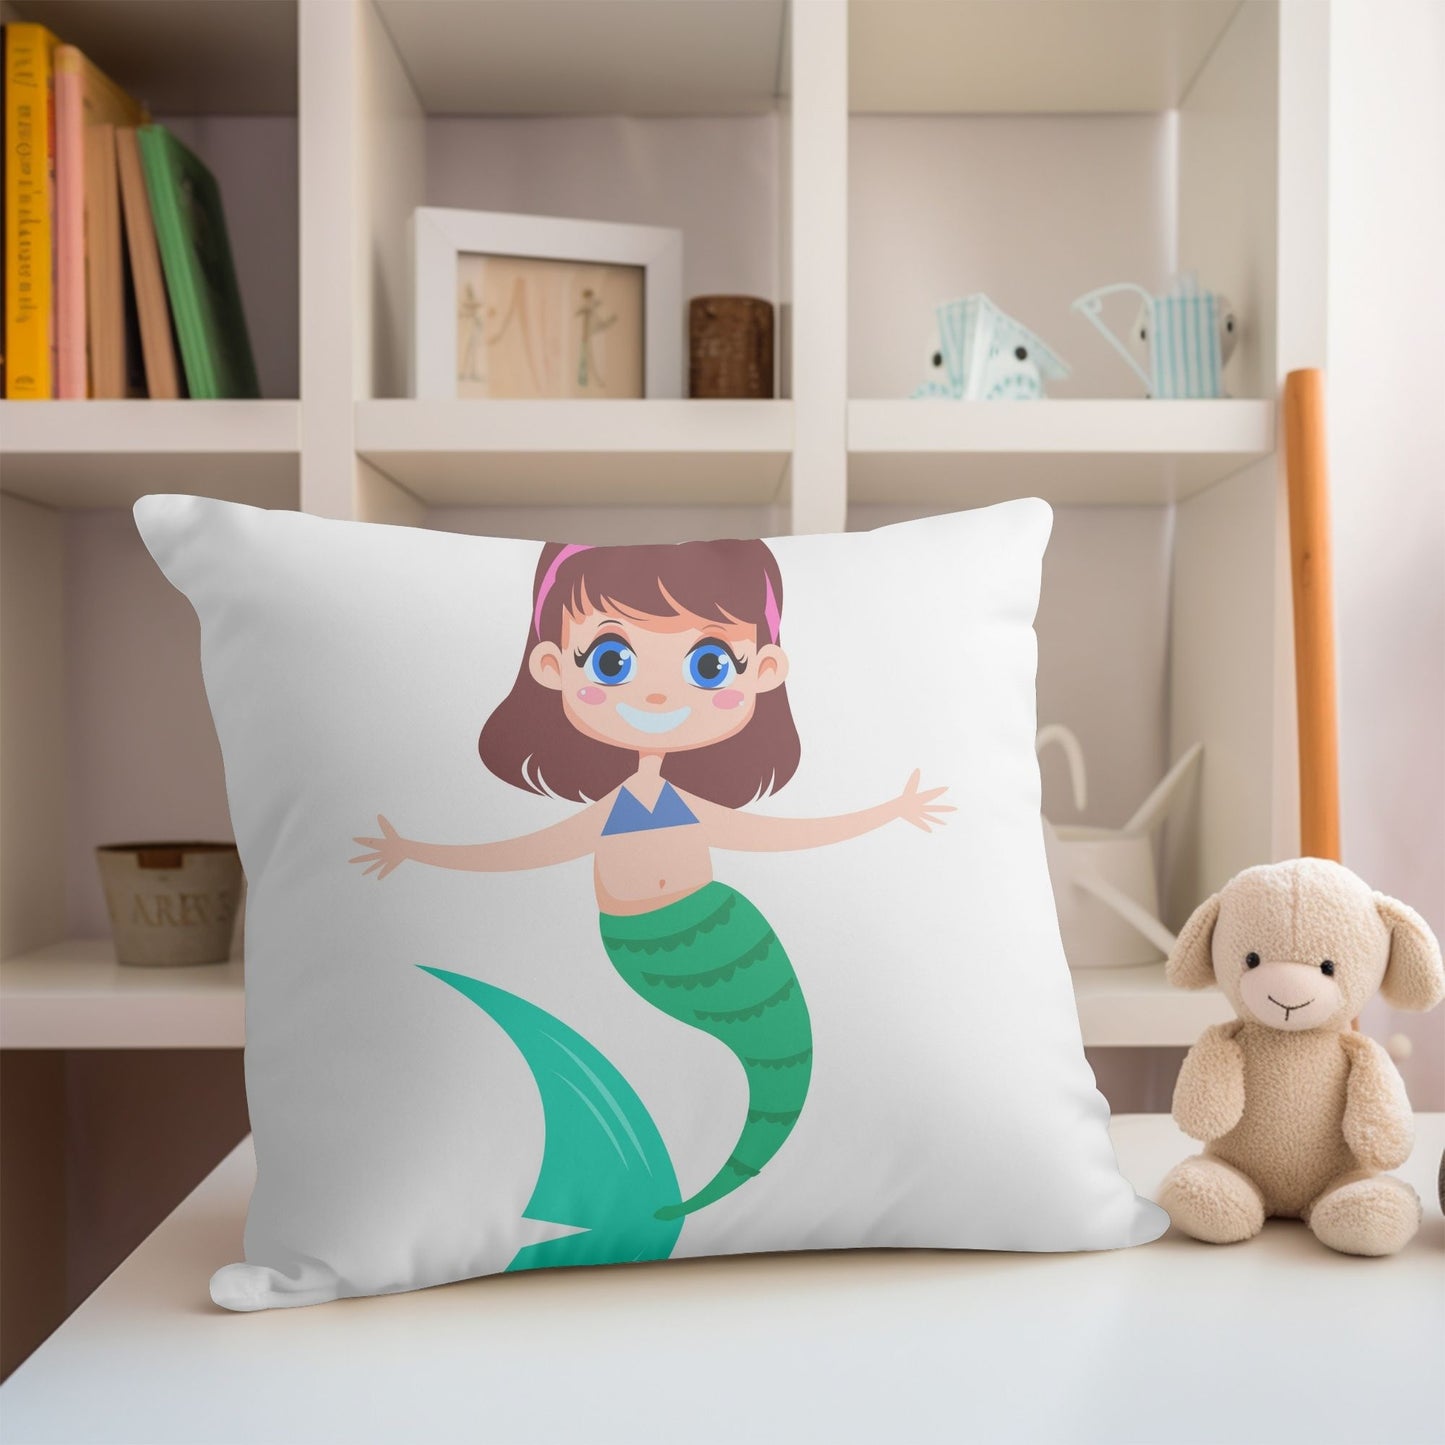 Imaginative mermaid girl pillow for adding a touch of magic to kids' spaces.